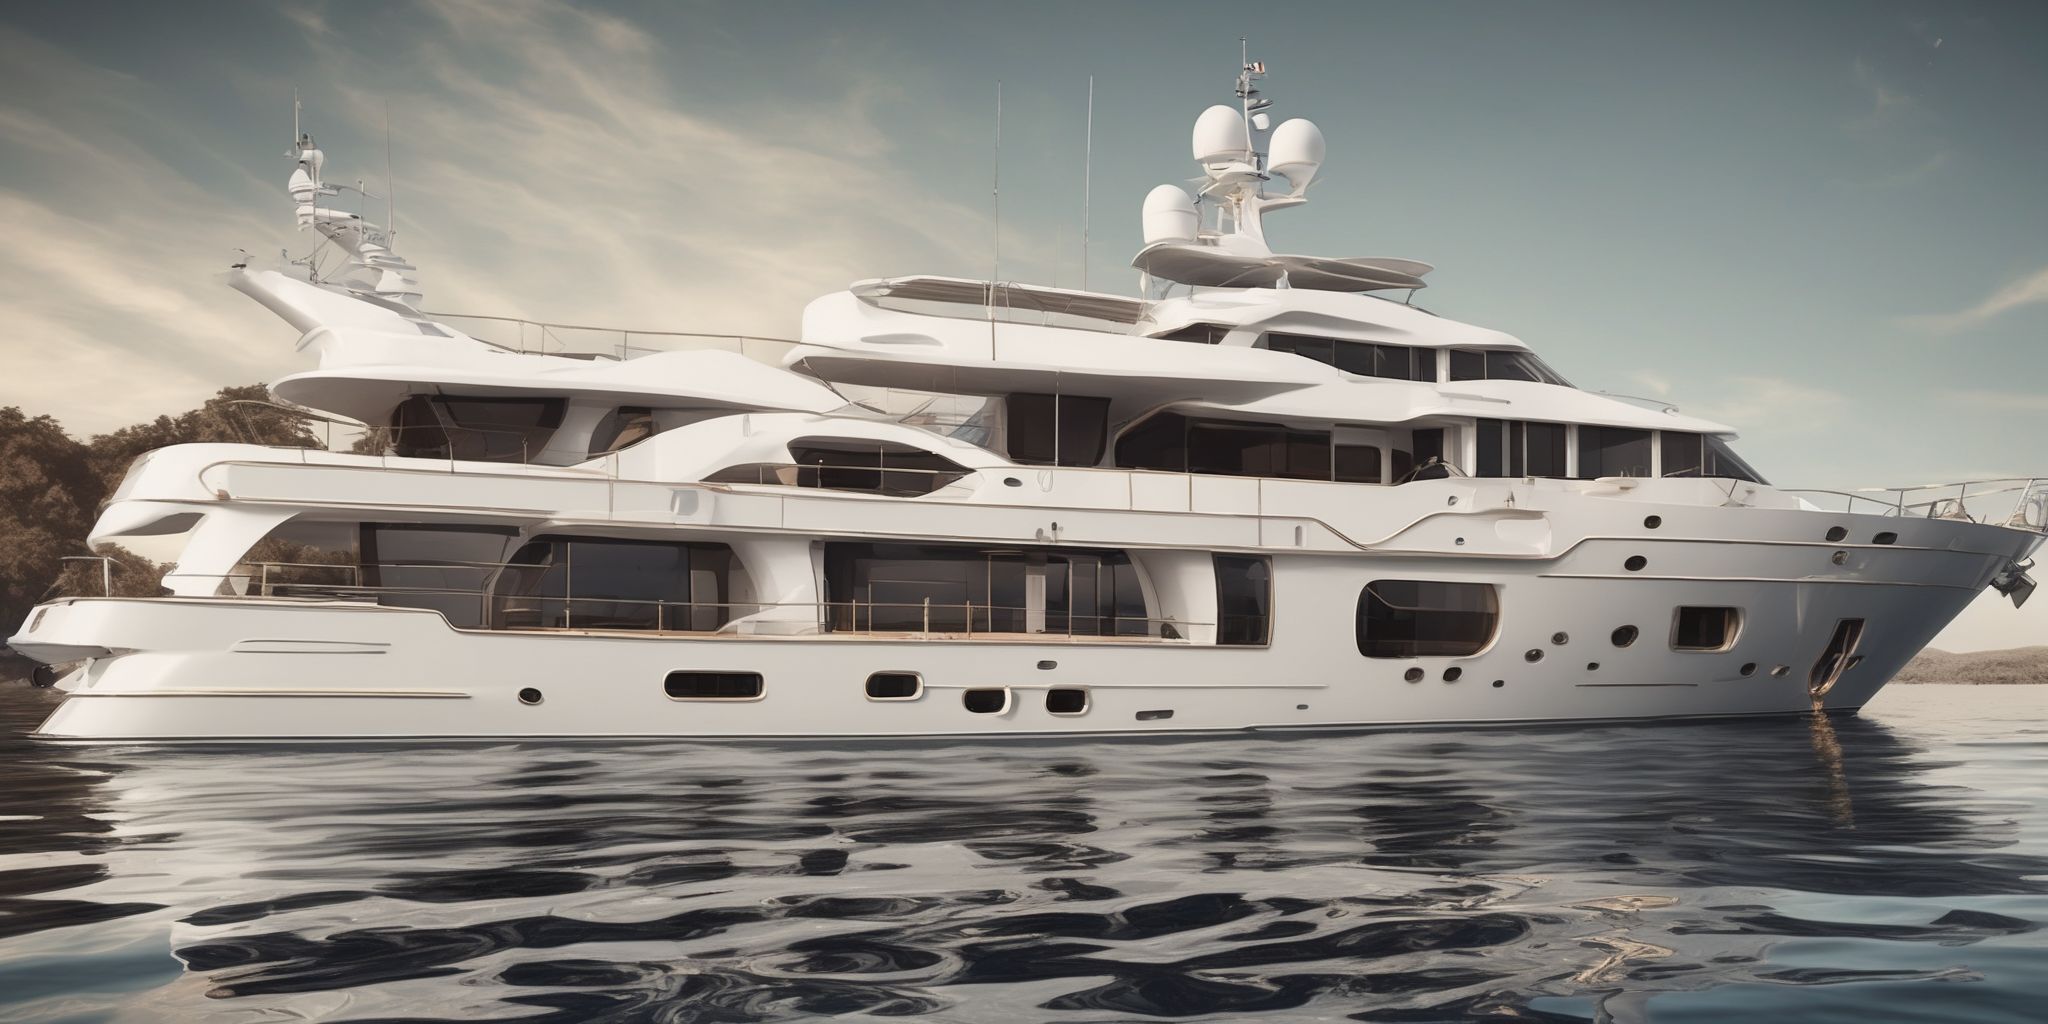 Yacht  in realistic, photographic style